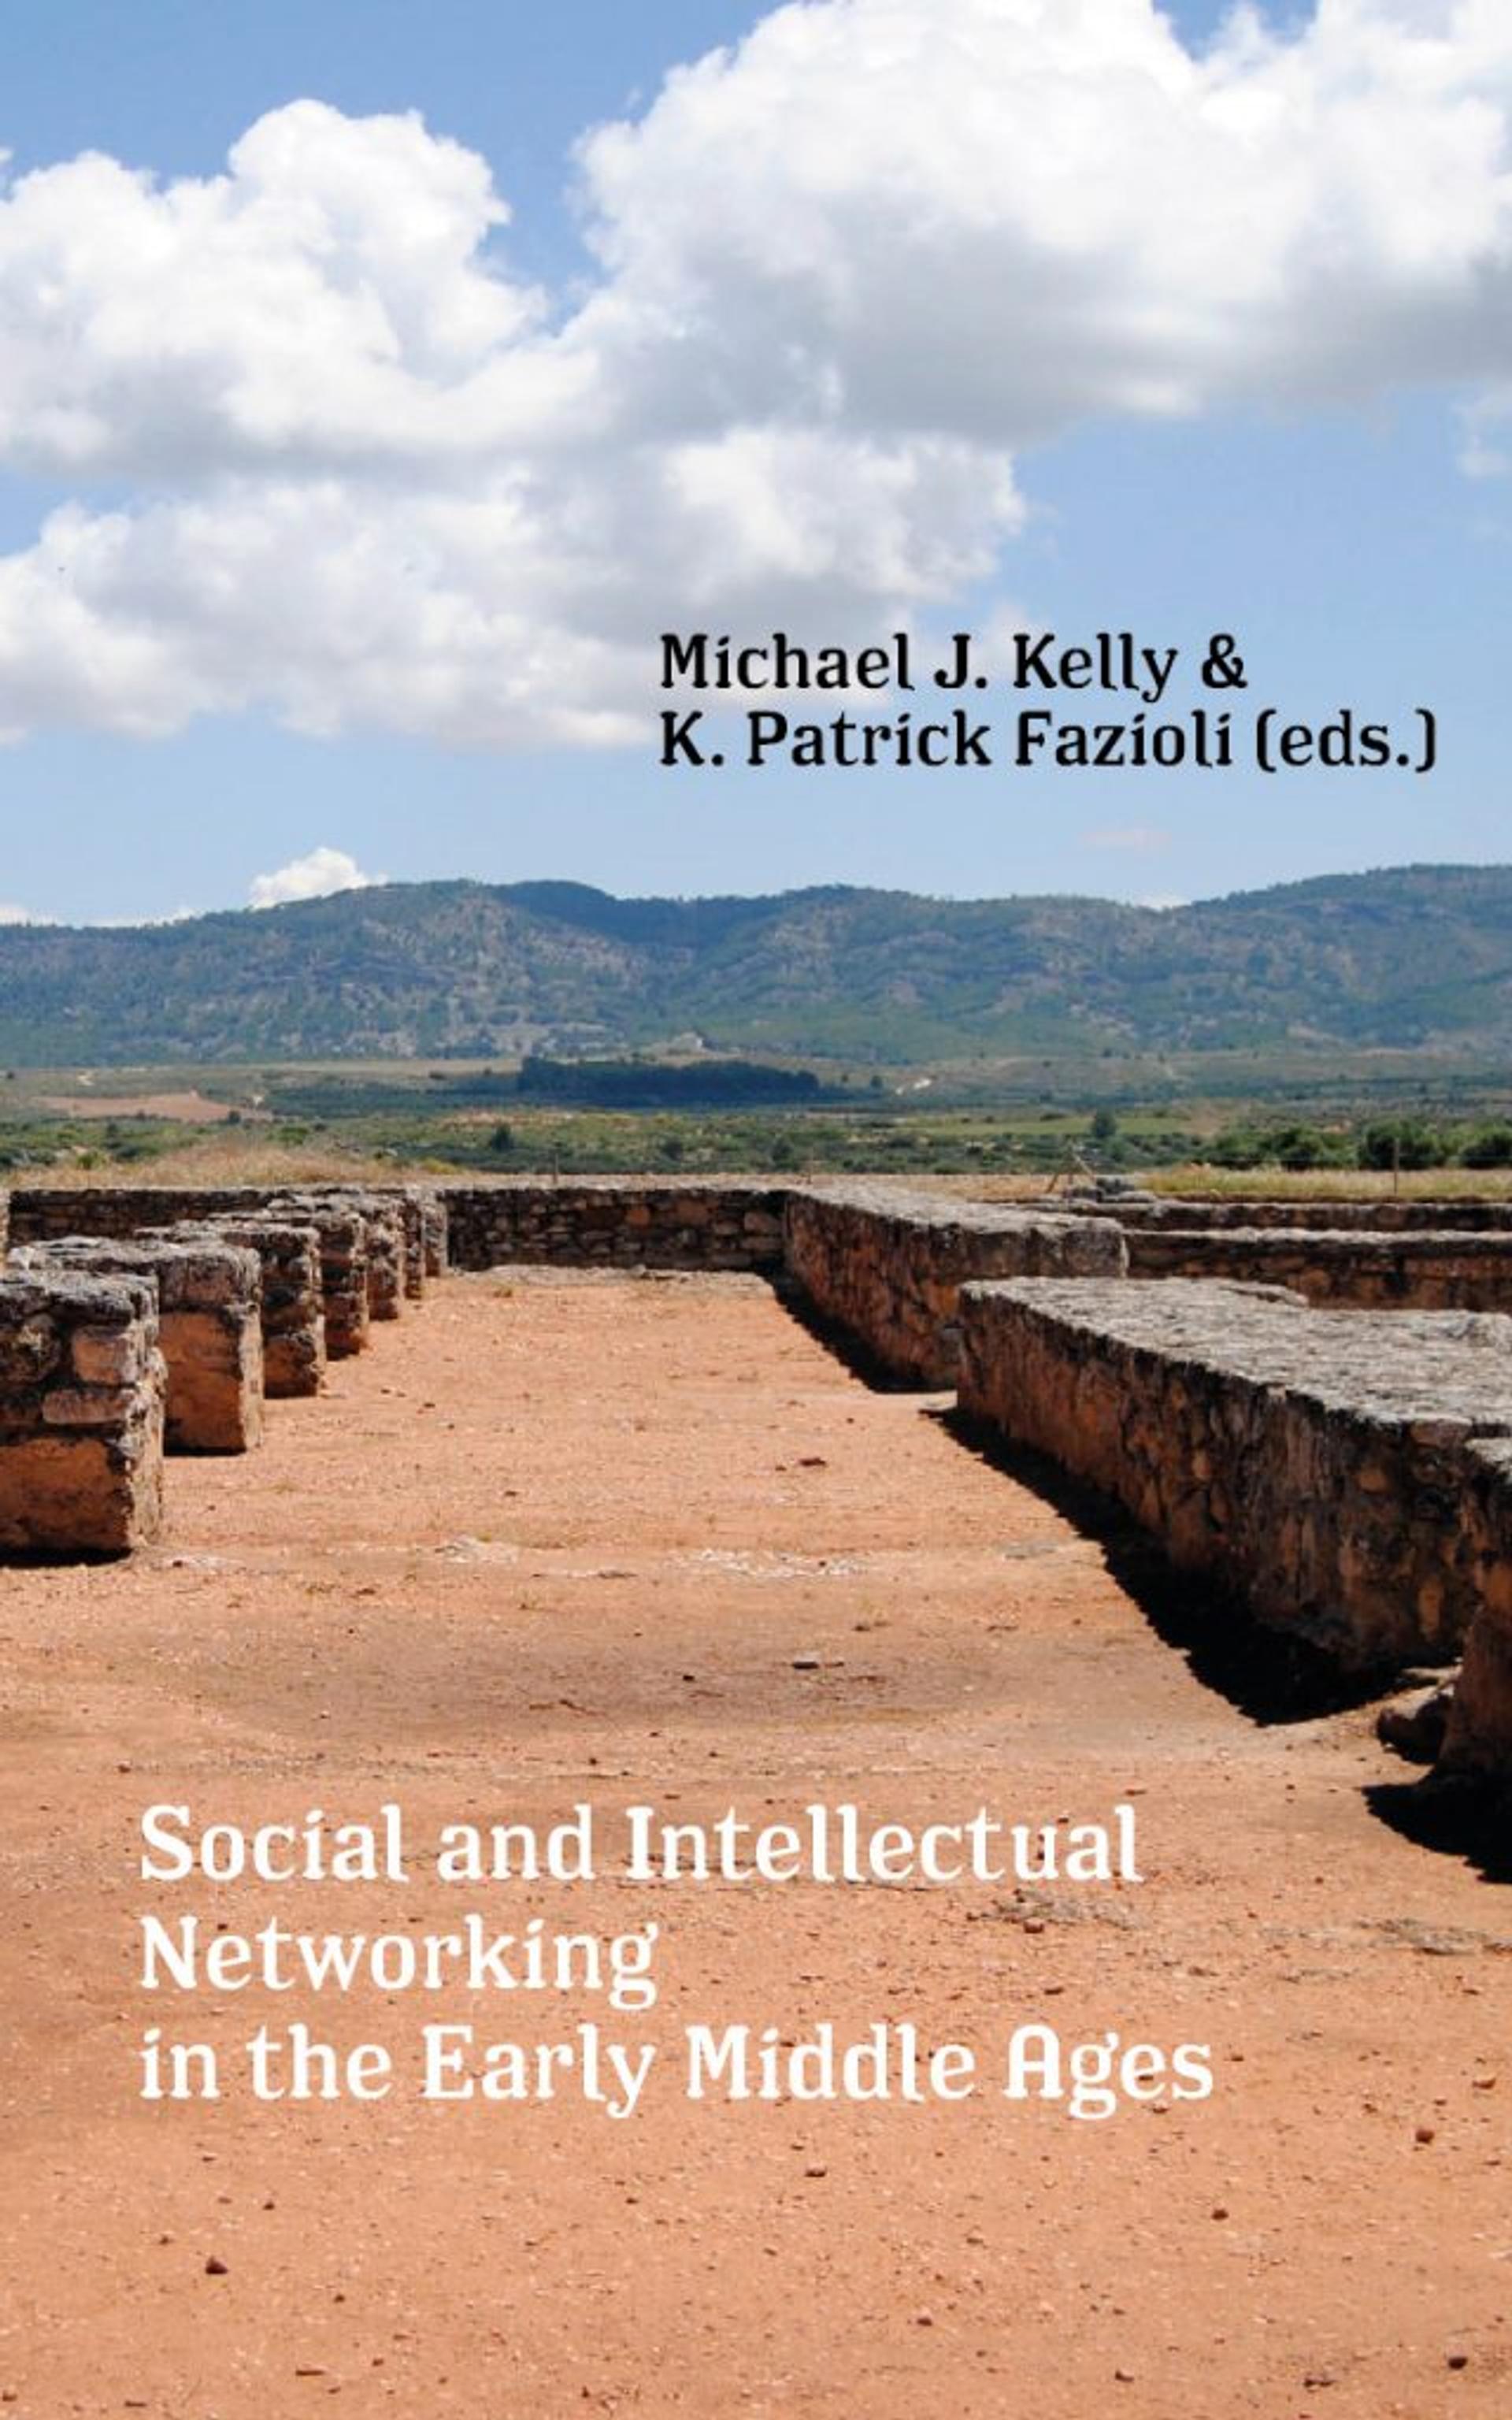 Cover of book titled Social and Intellectual Networking in the Early Middle Ages